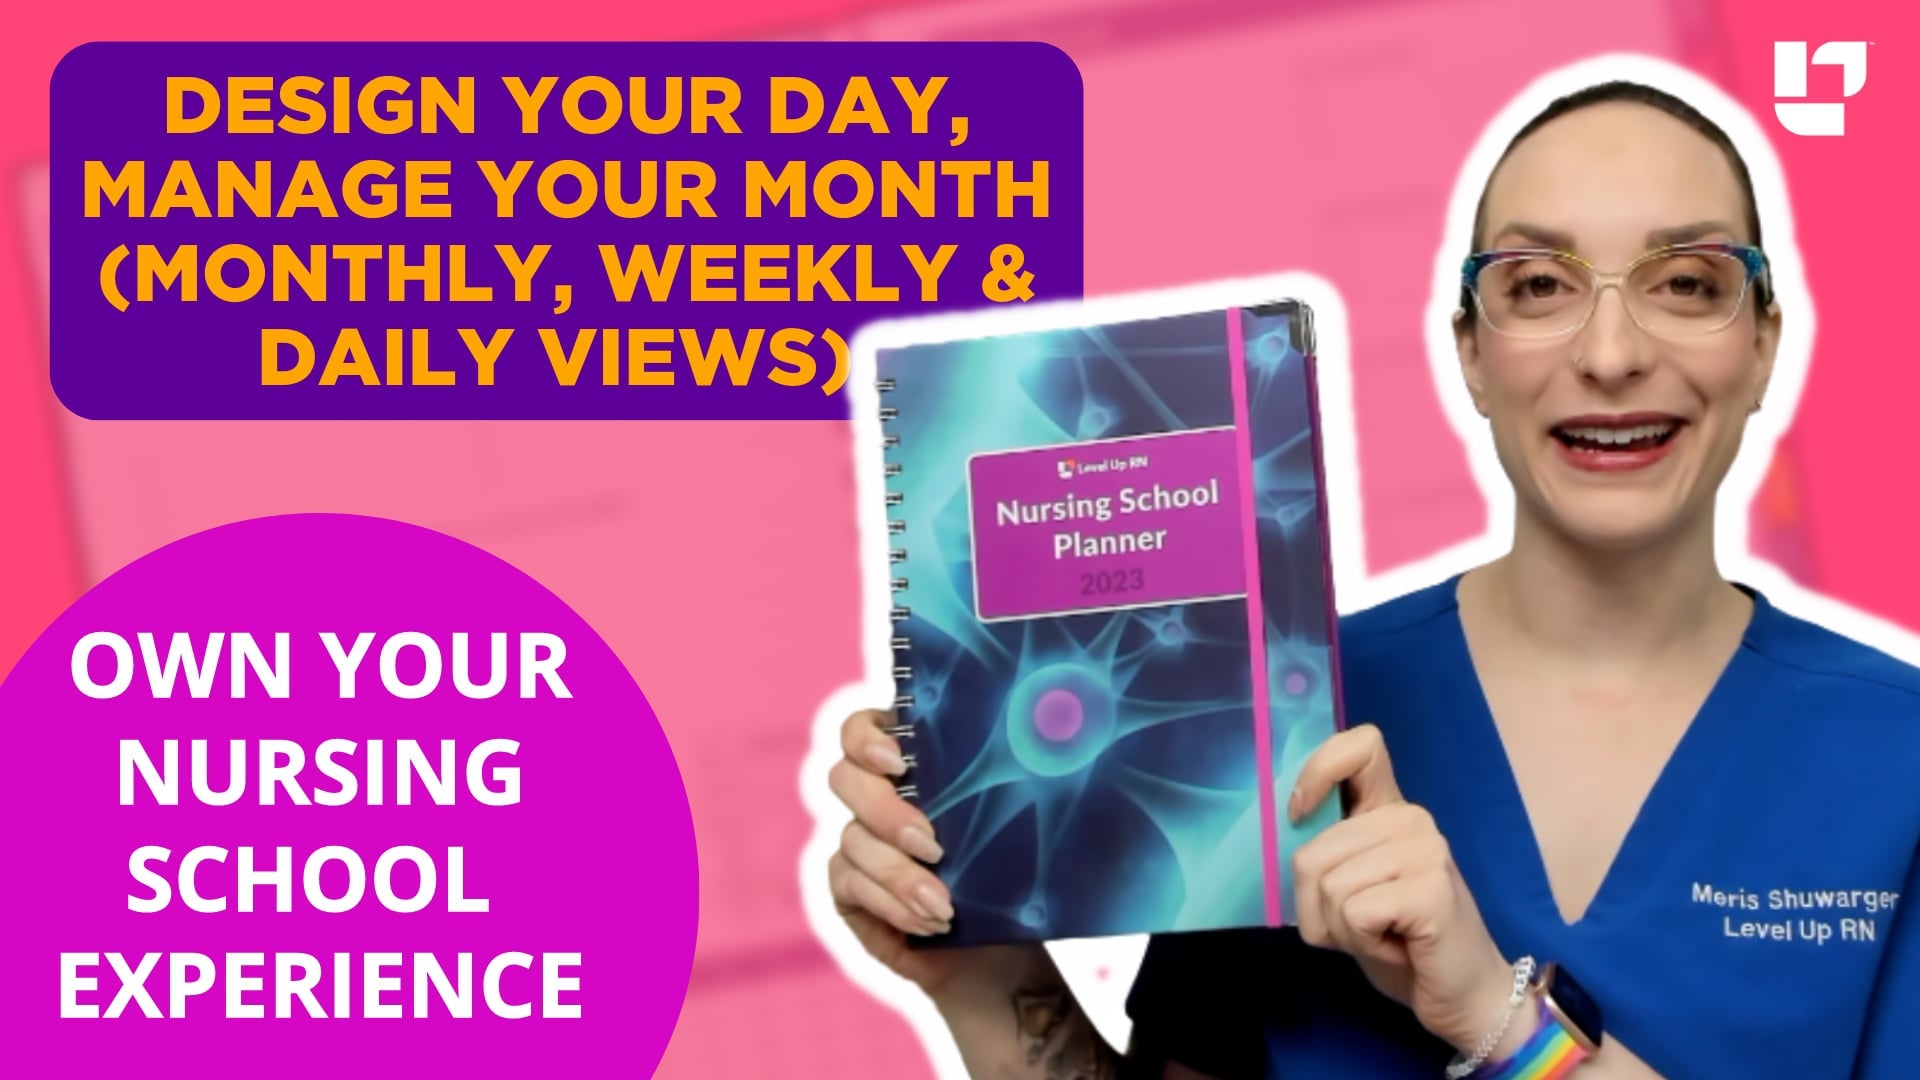 Design Your Day, Manage Your Month - Owning Your Nursing School Journey - LevelUpRN